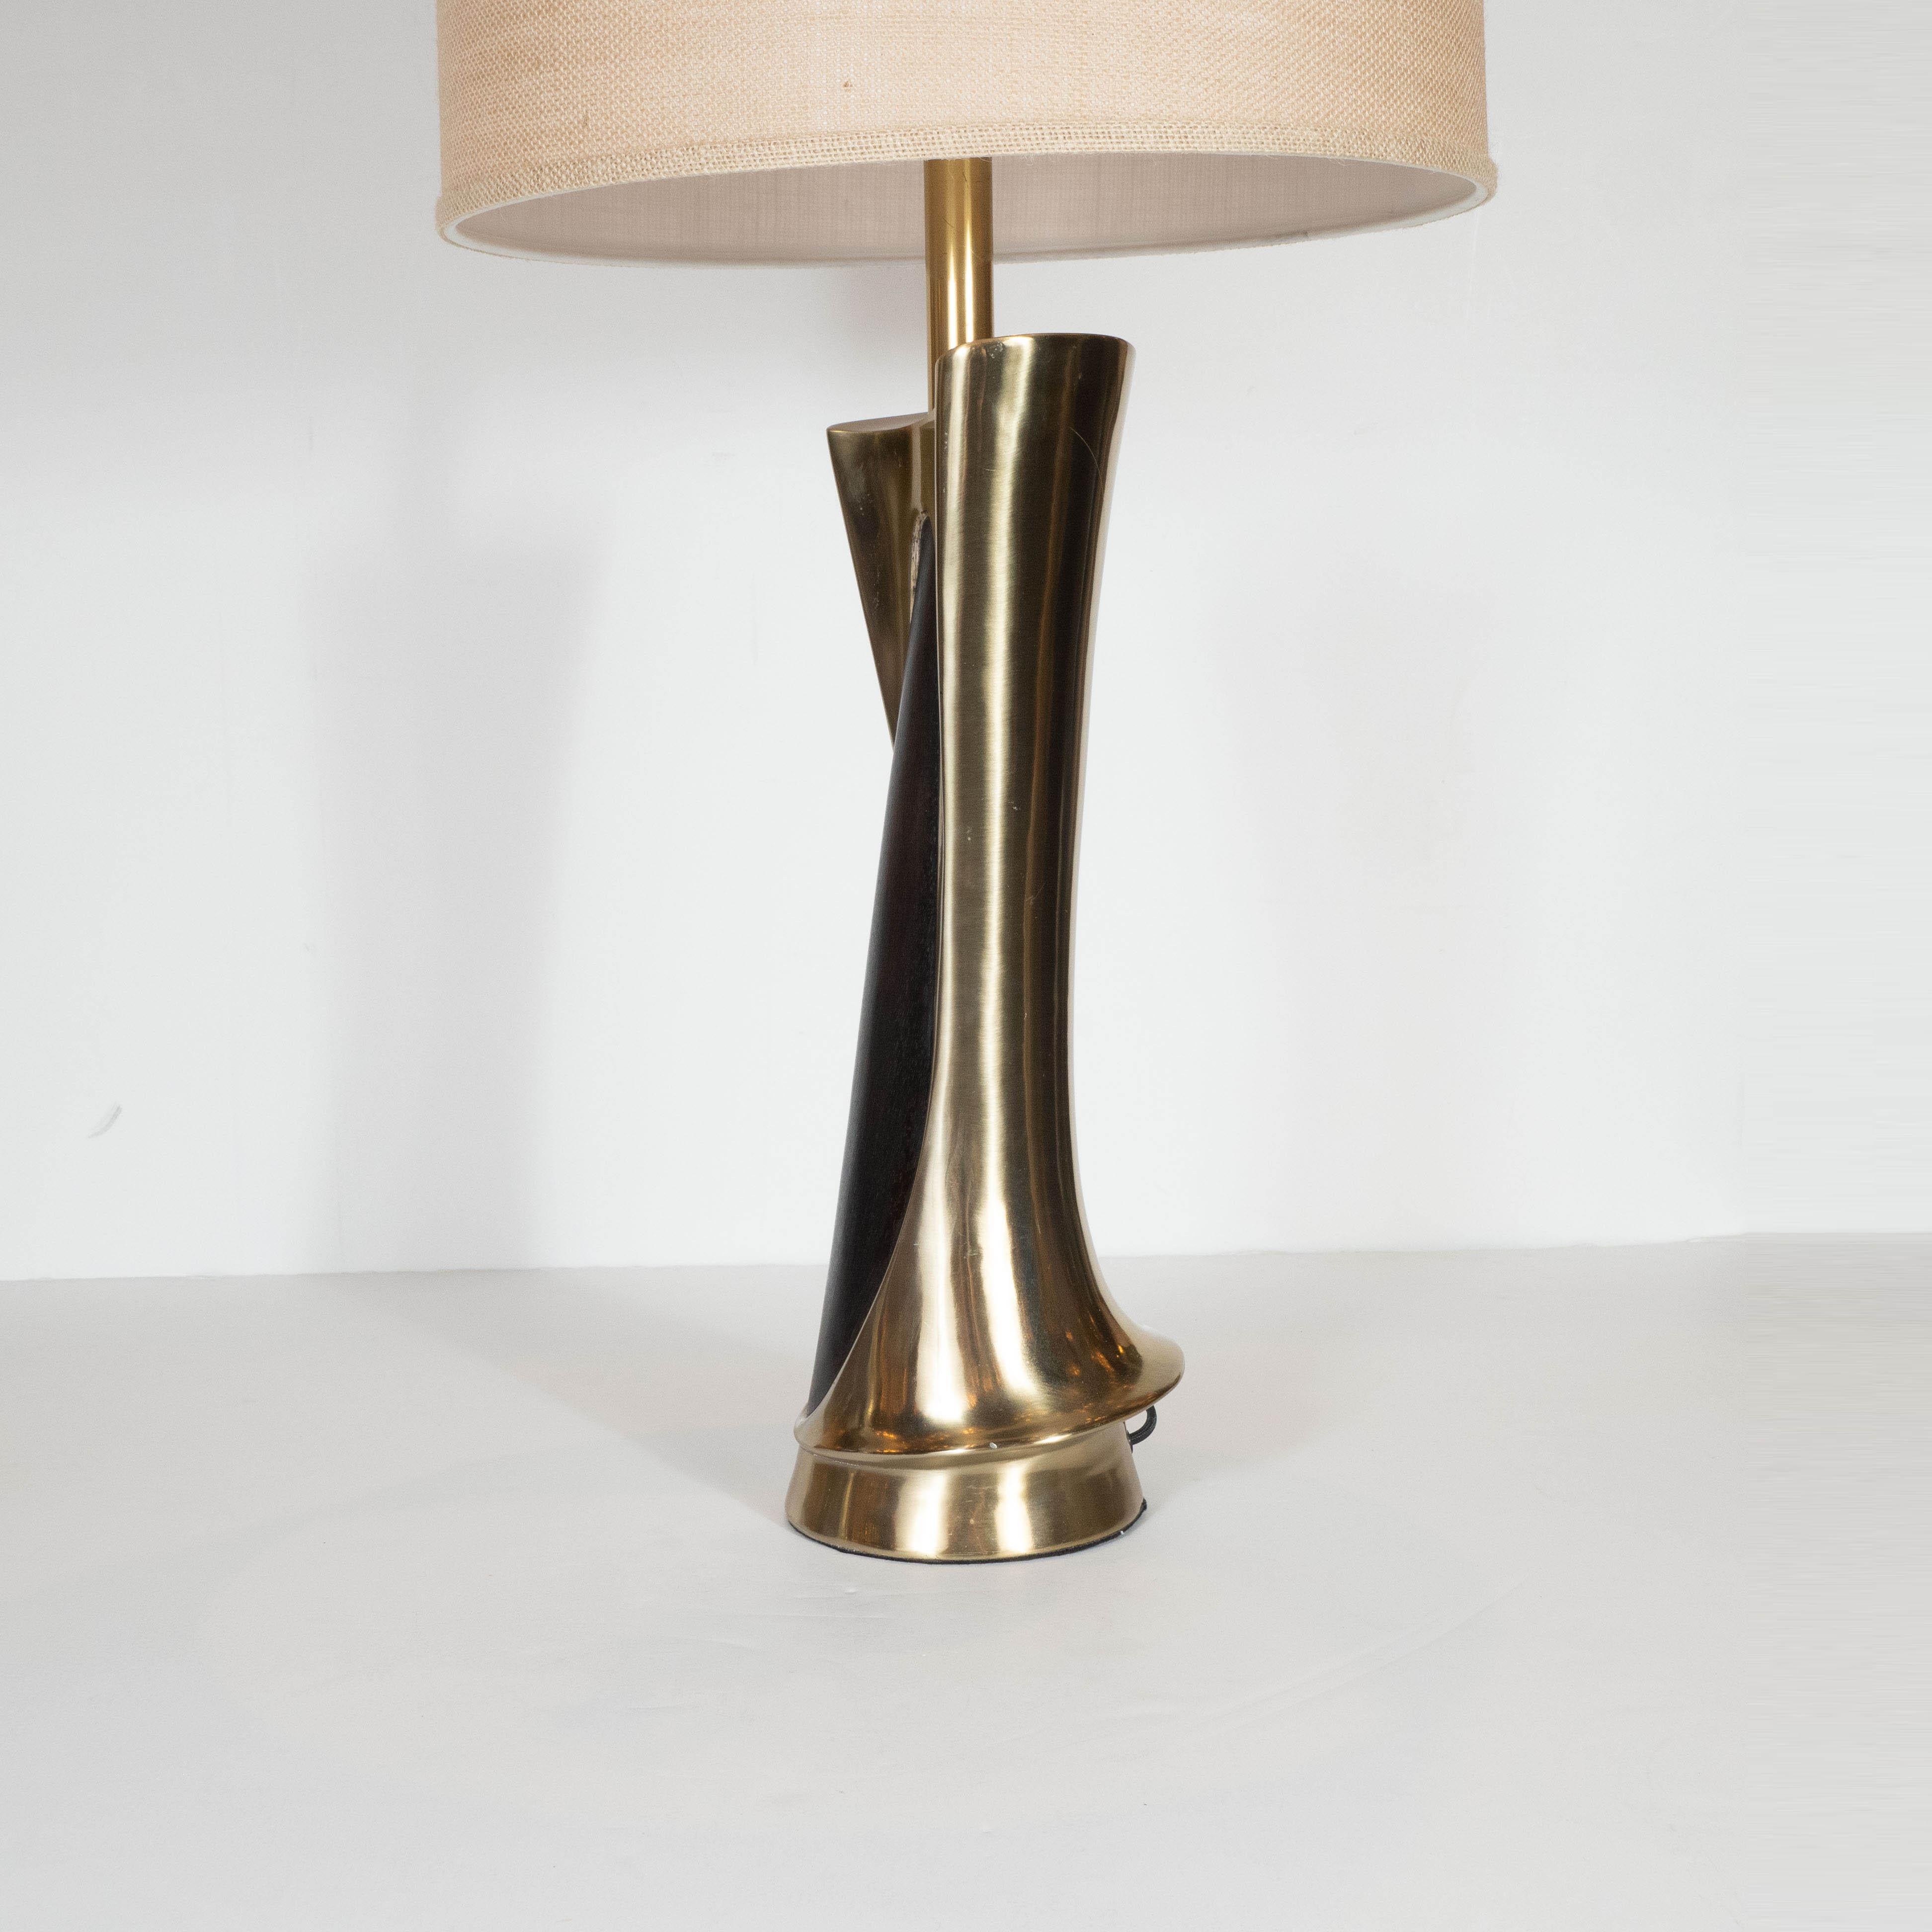 Late 20th Century Pair of Midcentury Brass and Ebonized Walnut Table Lamps by Laurel & Co.